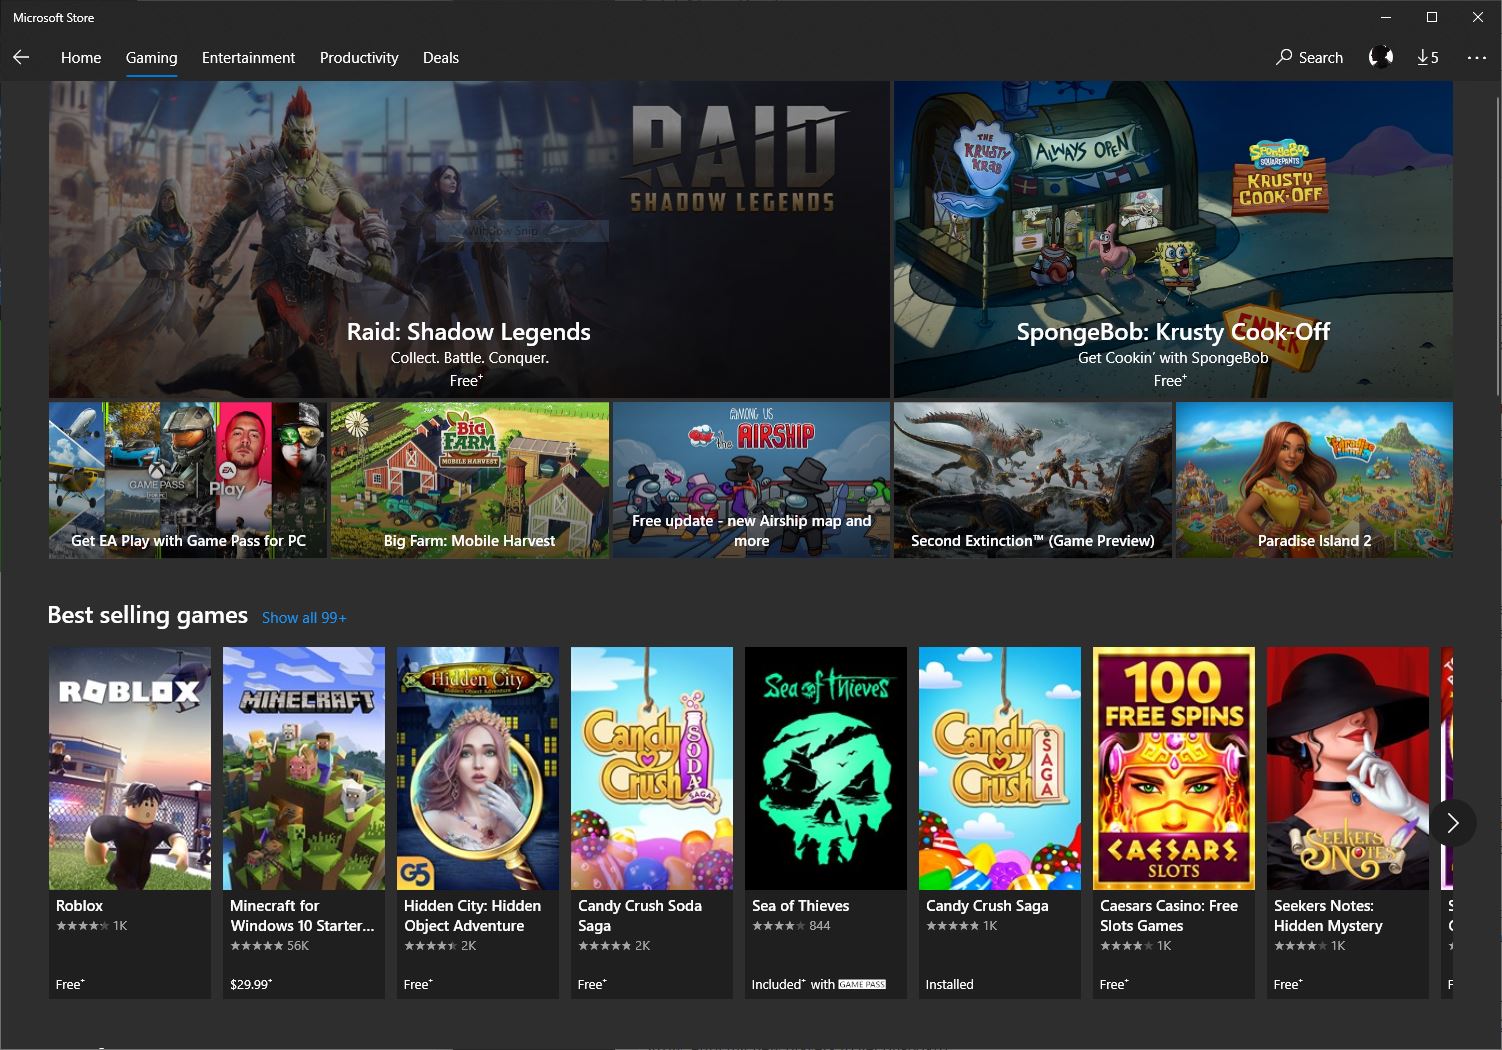 Microsoft set to close Games for Windows Live PC Marketplace